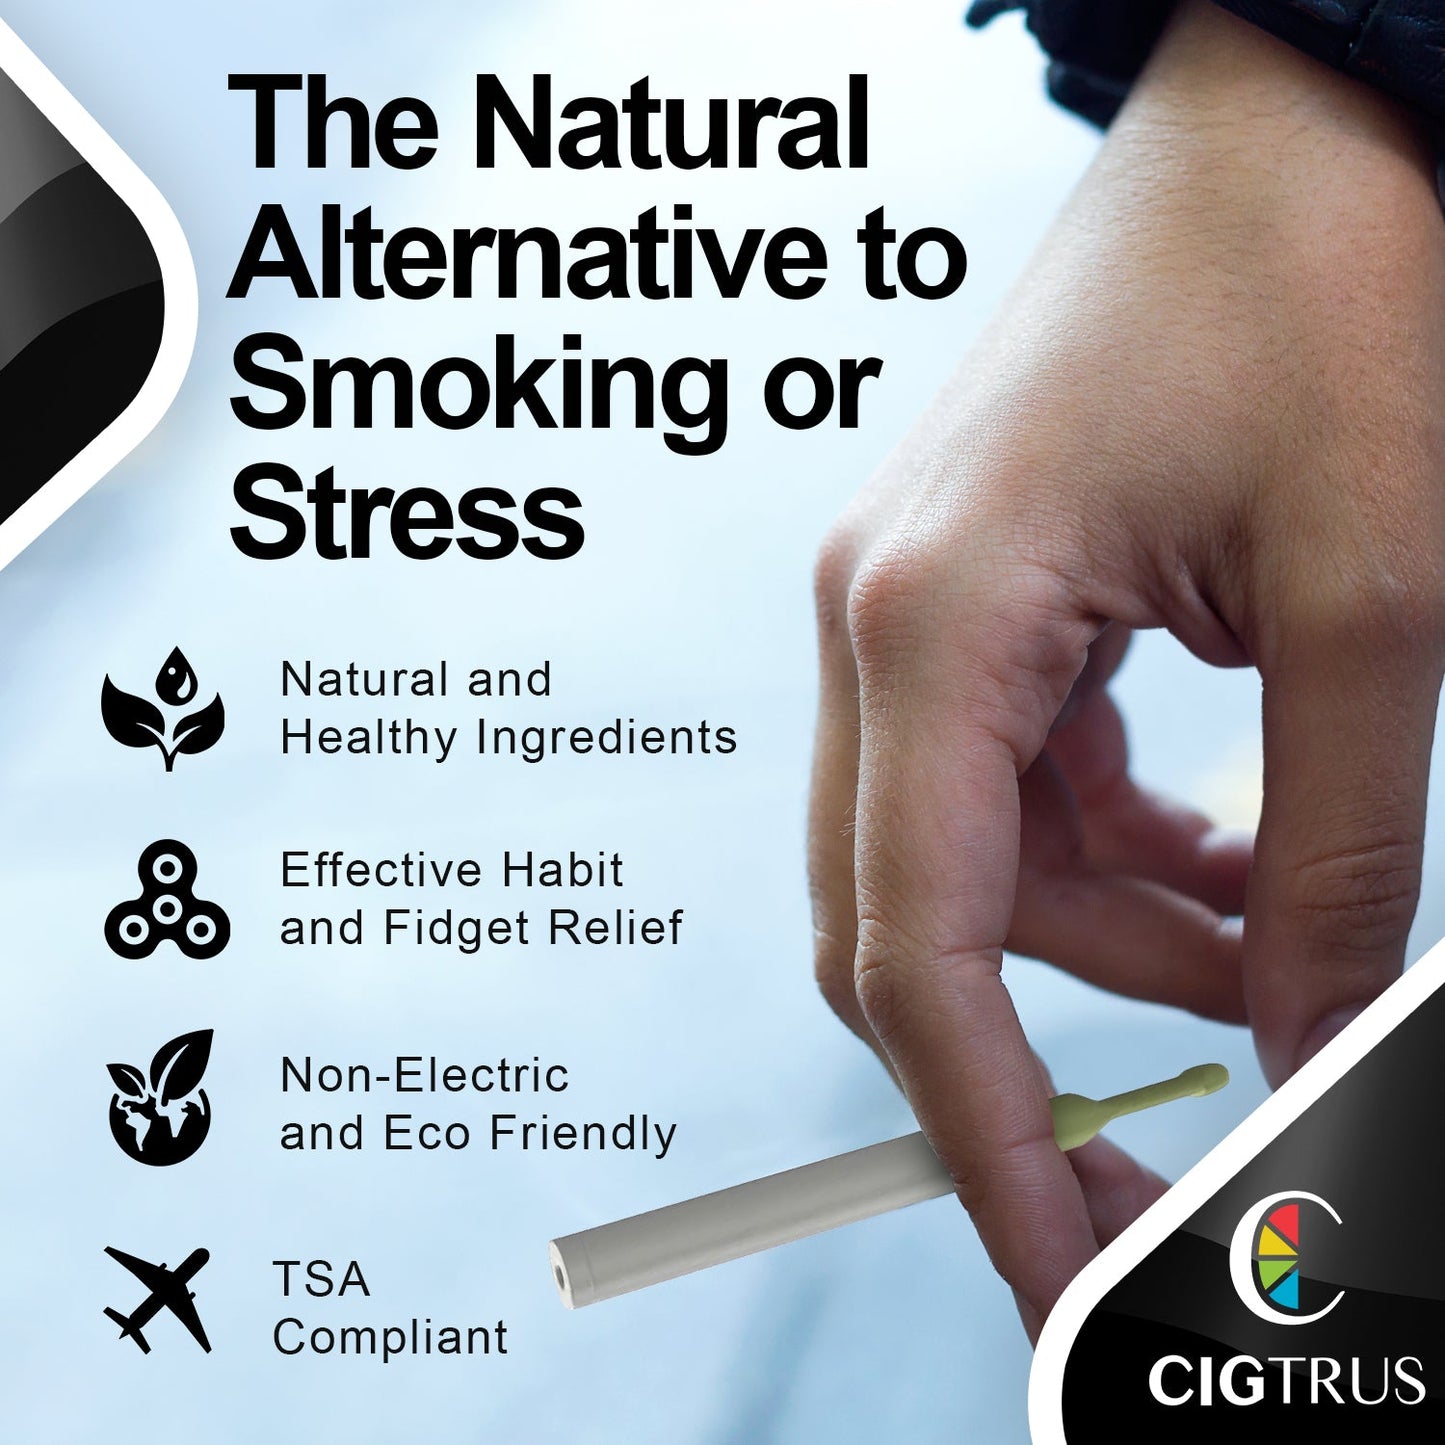 Cigtrus Quit Smoking Behavioral Support Nicotine-Free Oxygen Inhaler Natural Remedy - The Throat Hit Collection Citrus Lime & Icy Peppermint 3 Pack Each - cigtrus.comcigtrus.com